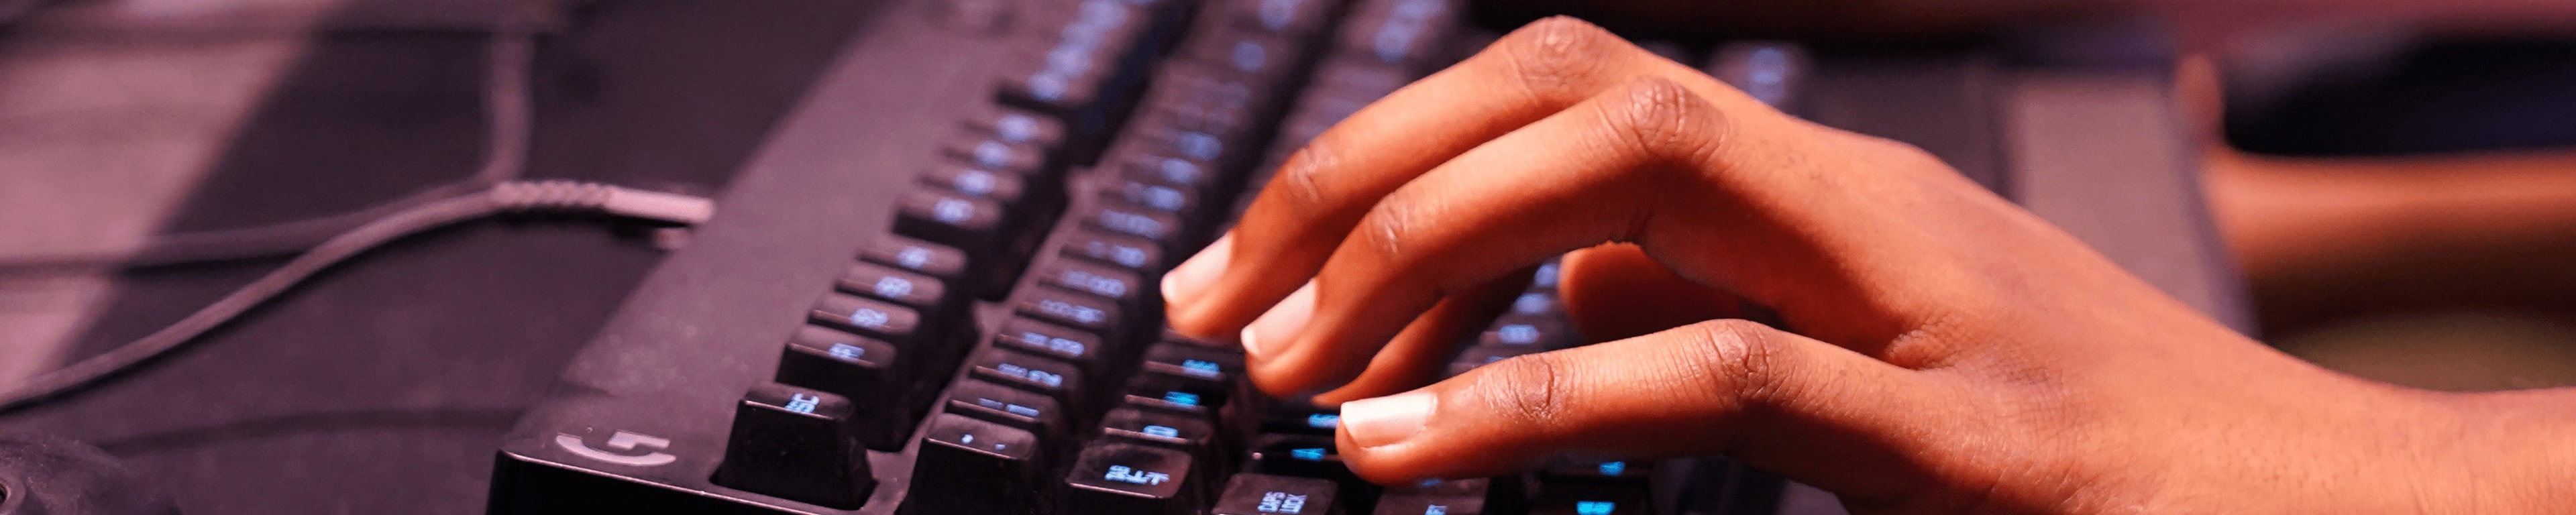 Students hand on a keyboard typing